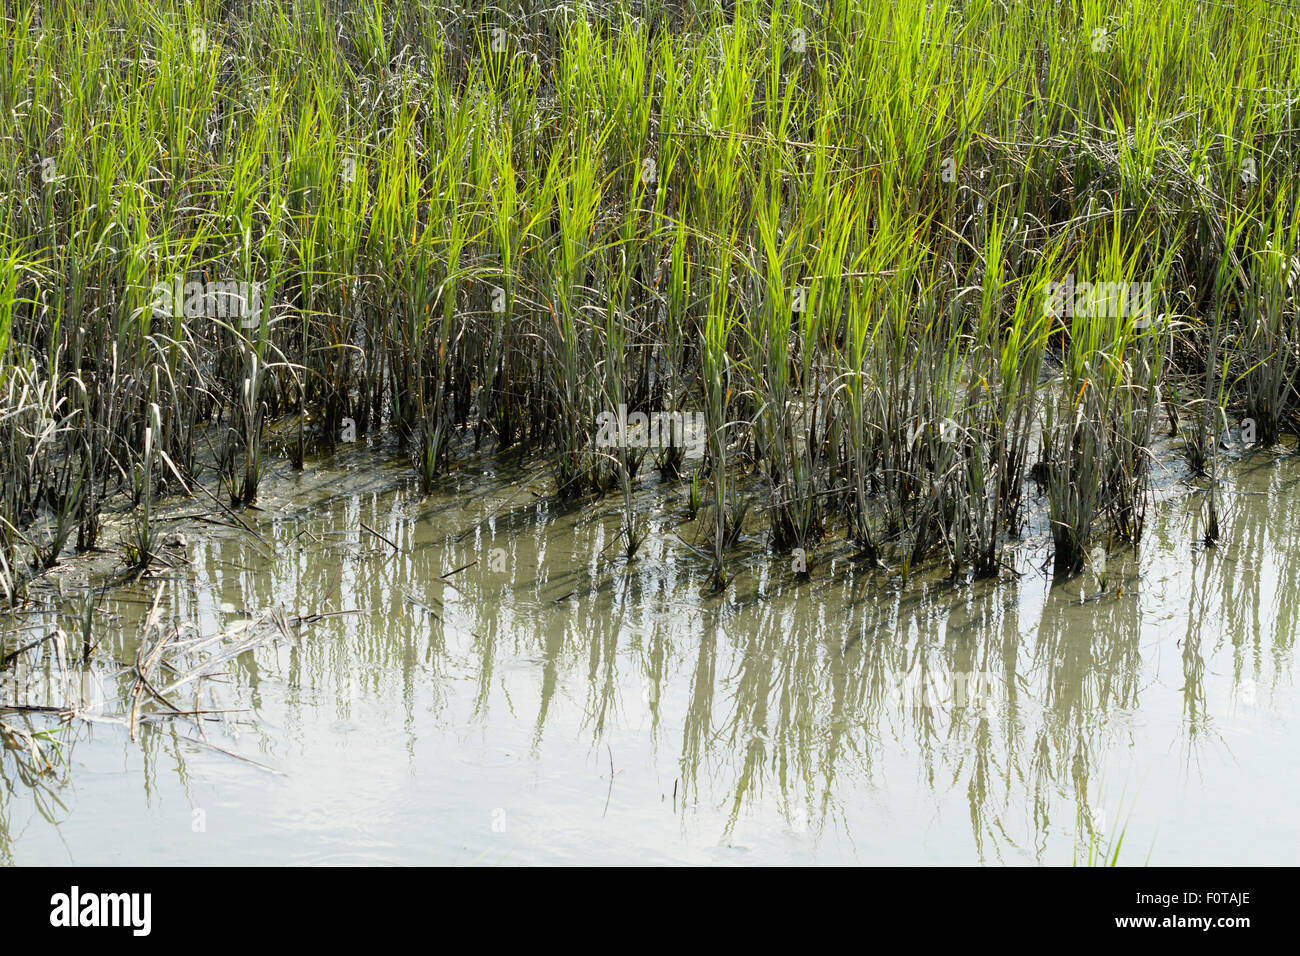 Smooth cordgrass and mud in the brackish water coastal area in Murrells Inlet, South Carolina. Stock Photo